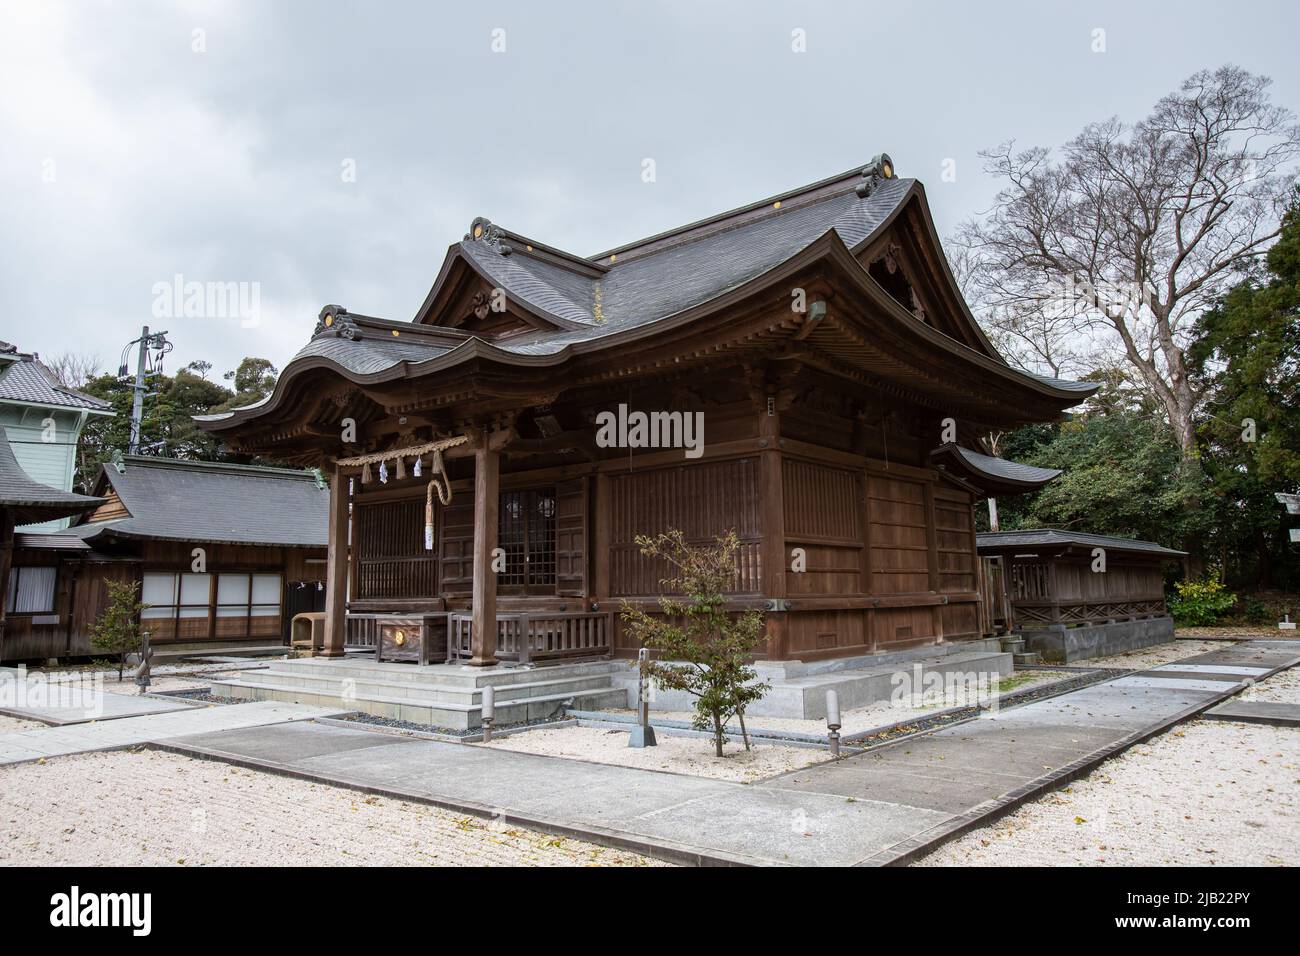 Matsue Jinja (Matsue Shrine), at the Matsue Jo area. It built in 1877 to enshrine the daimyo and eminent figures from the former Matsue domain Stock Photo